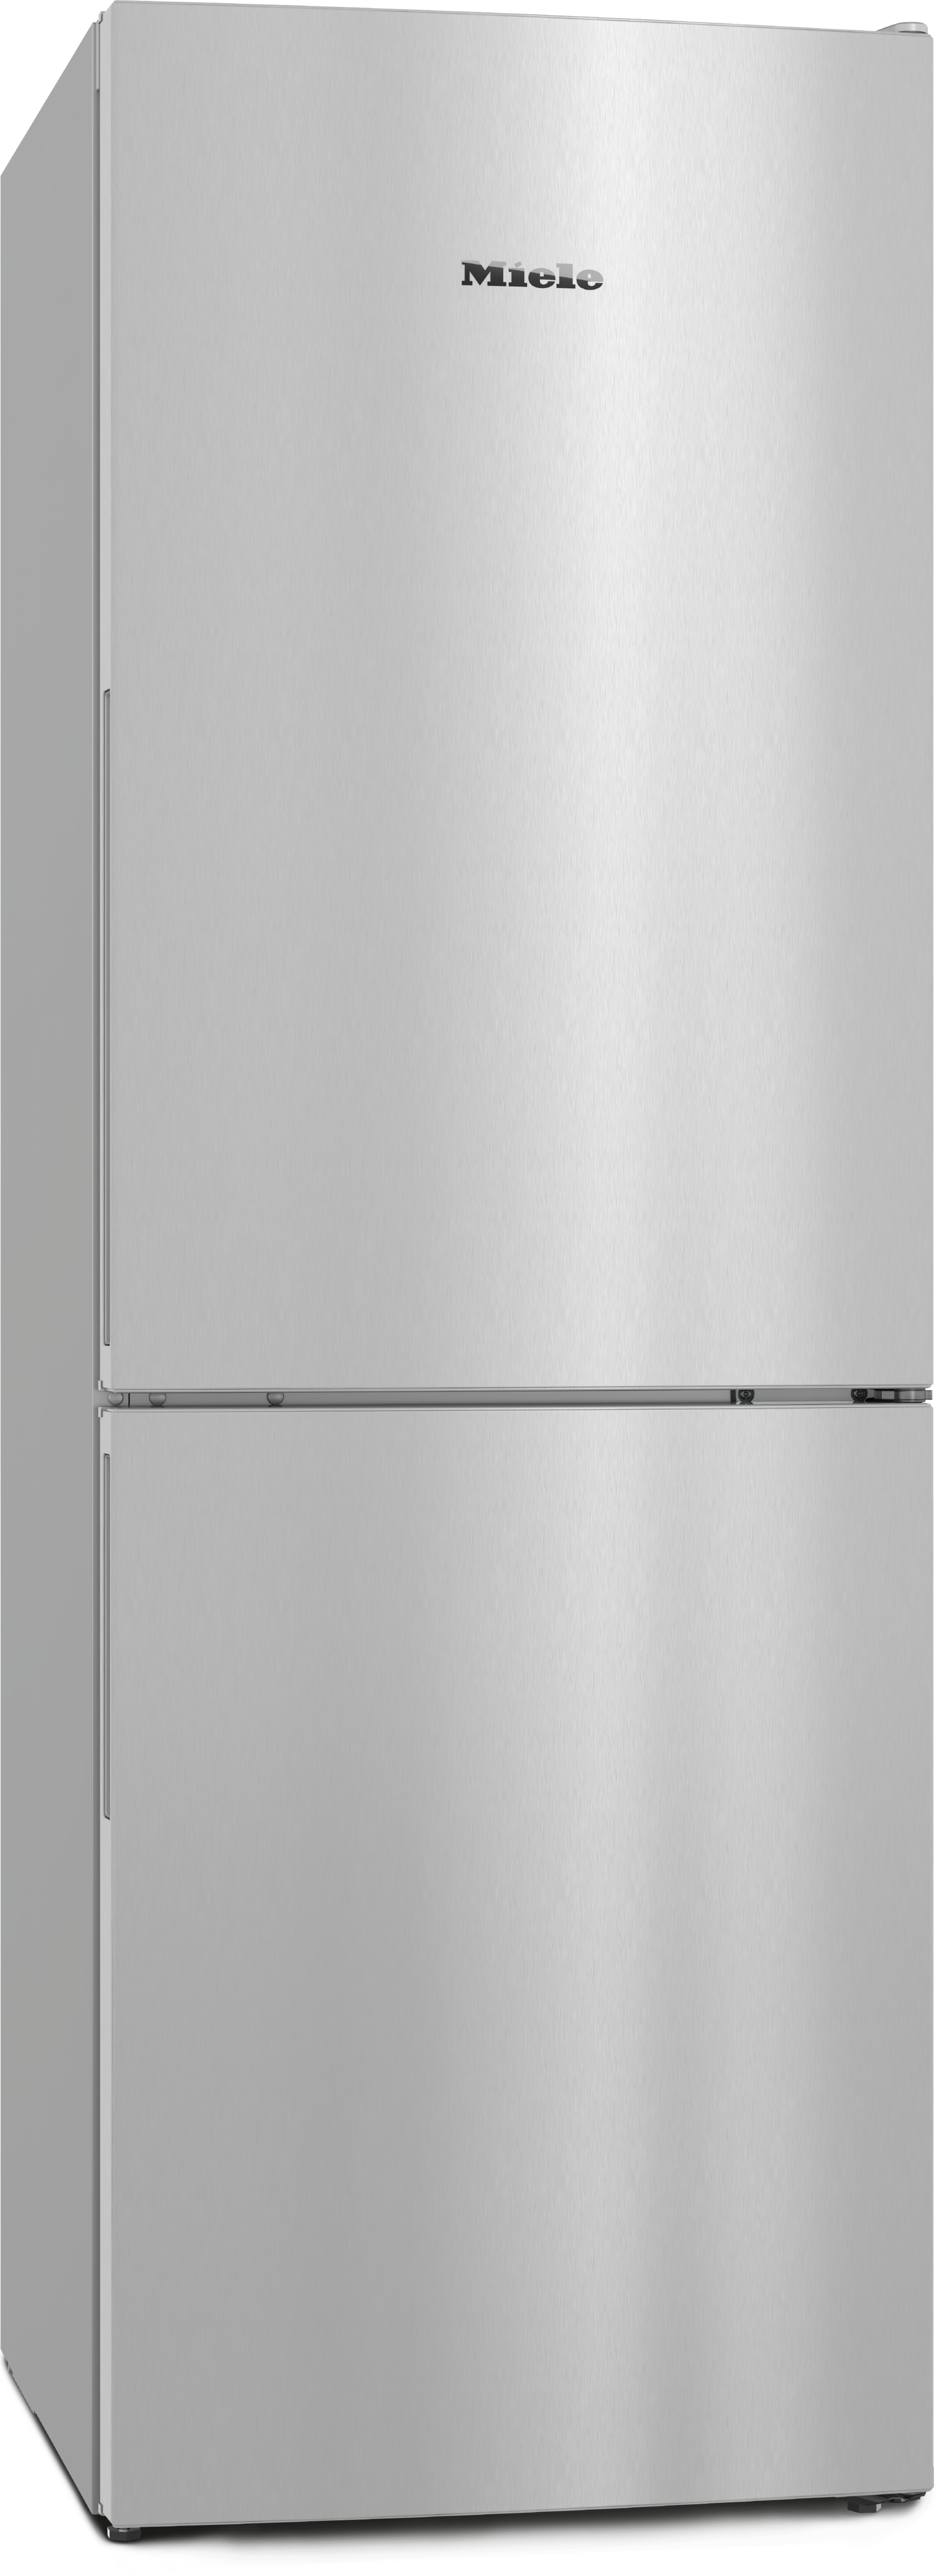 Refrigeration - KD 4050 E Active Stainless look - 1